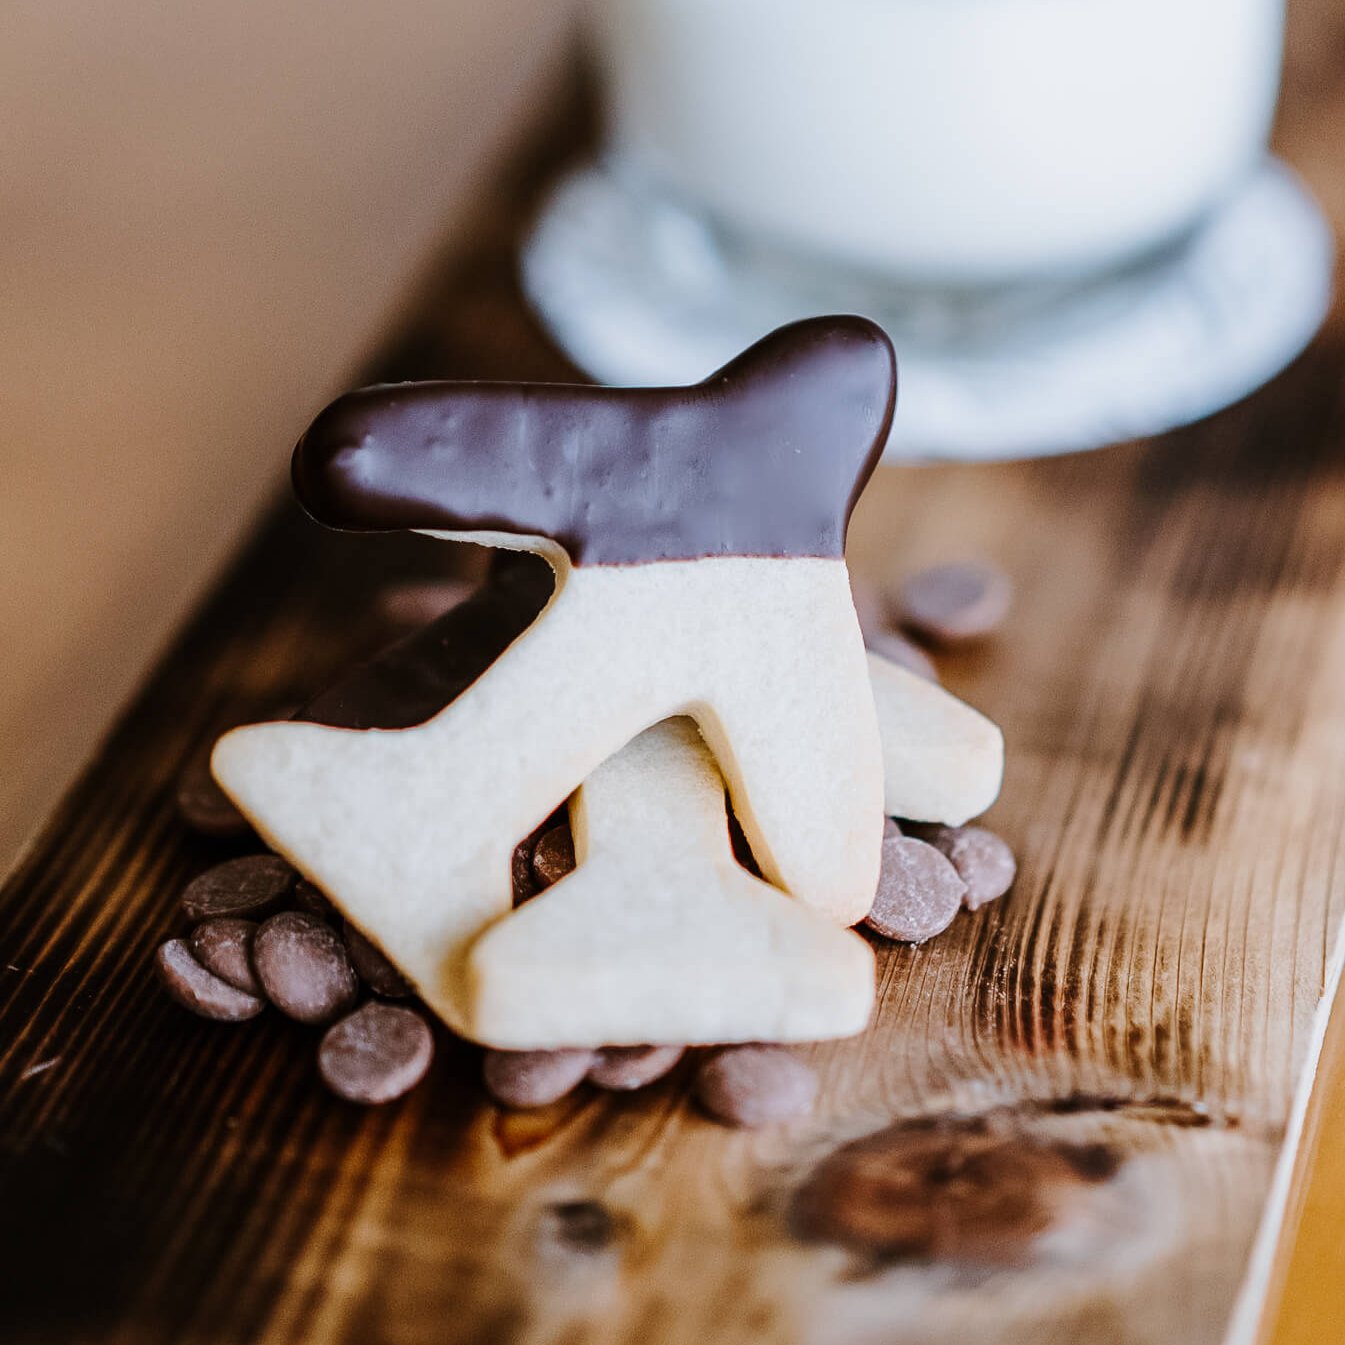 A board with a glass of milk and airplane-shaped cookies dipped in chocolate.